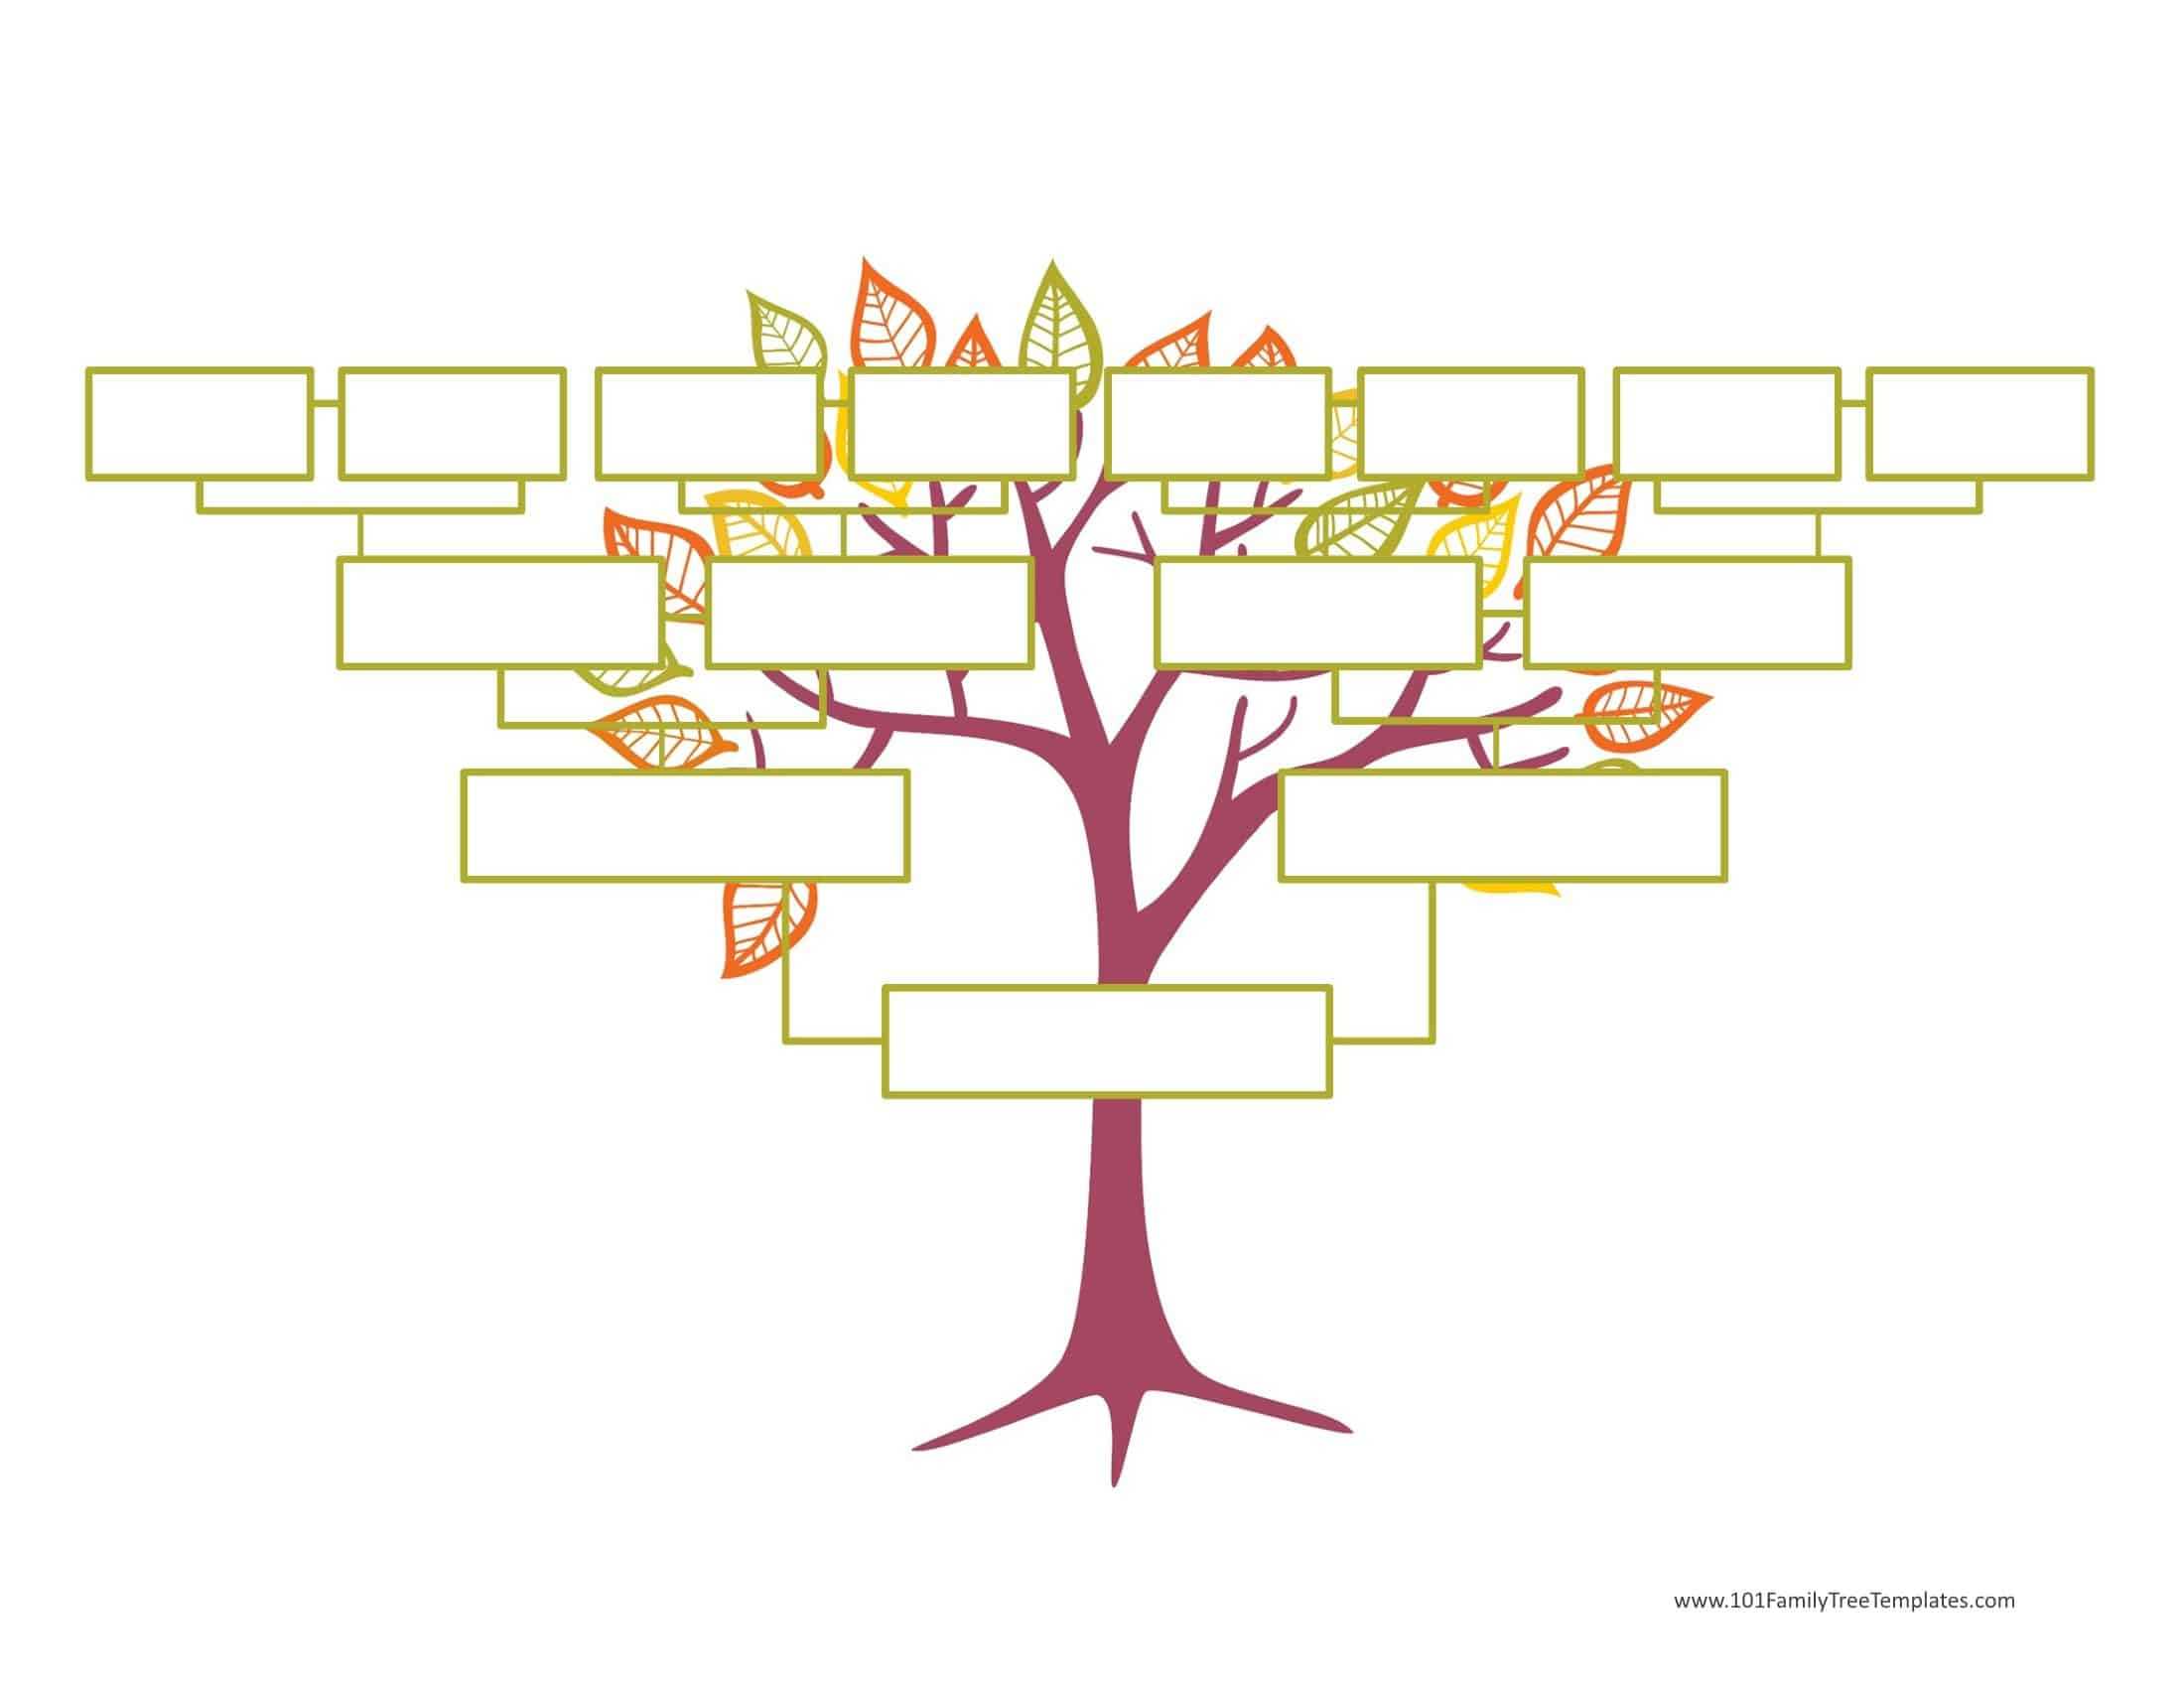 Blank Family Tree Template | Free Instant Download Throughout Blank Family Tree Template 3 Generations